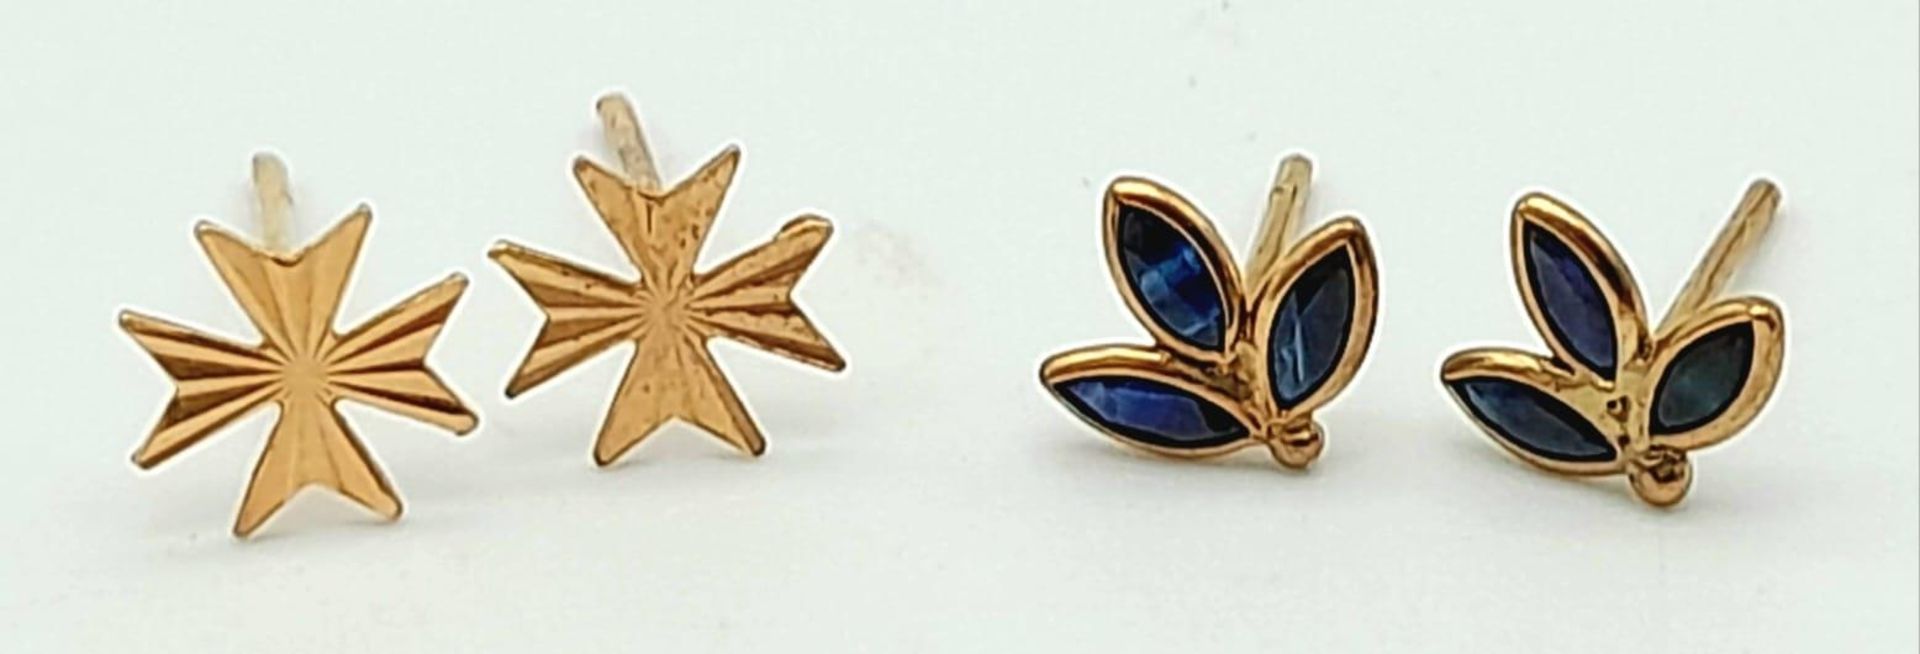 Two Pairs of 9K Gold Floral Shaped Stud Earrings. No backs.